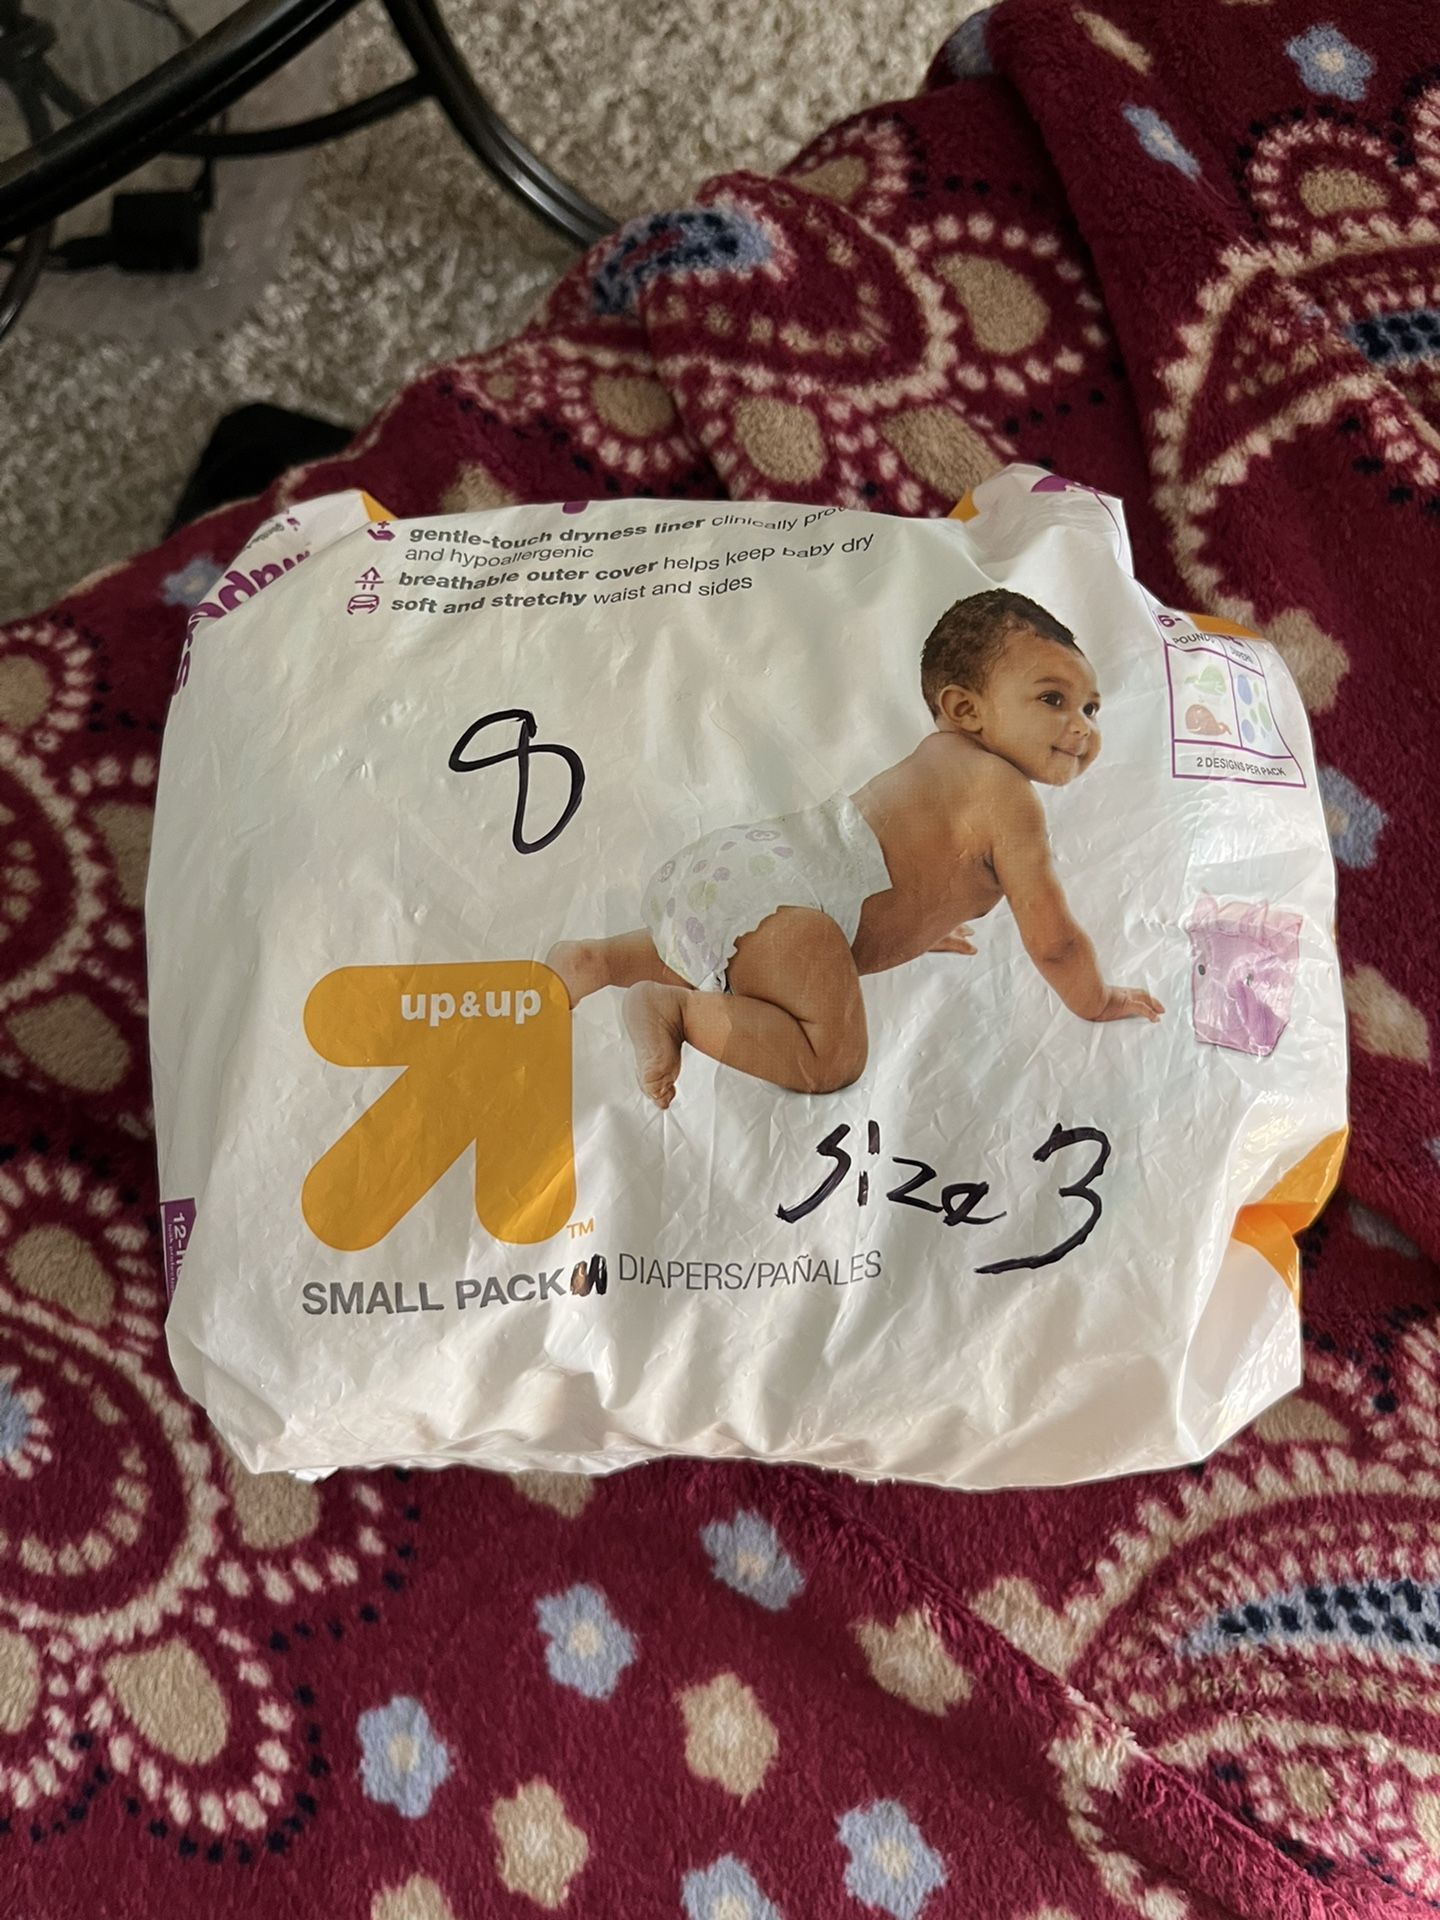 Baby Diaper’s Size 3 $5 For 8 Of Them 